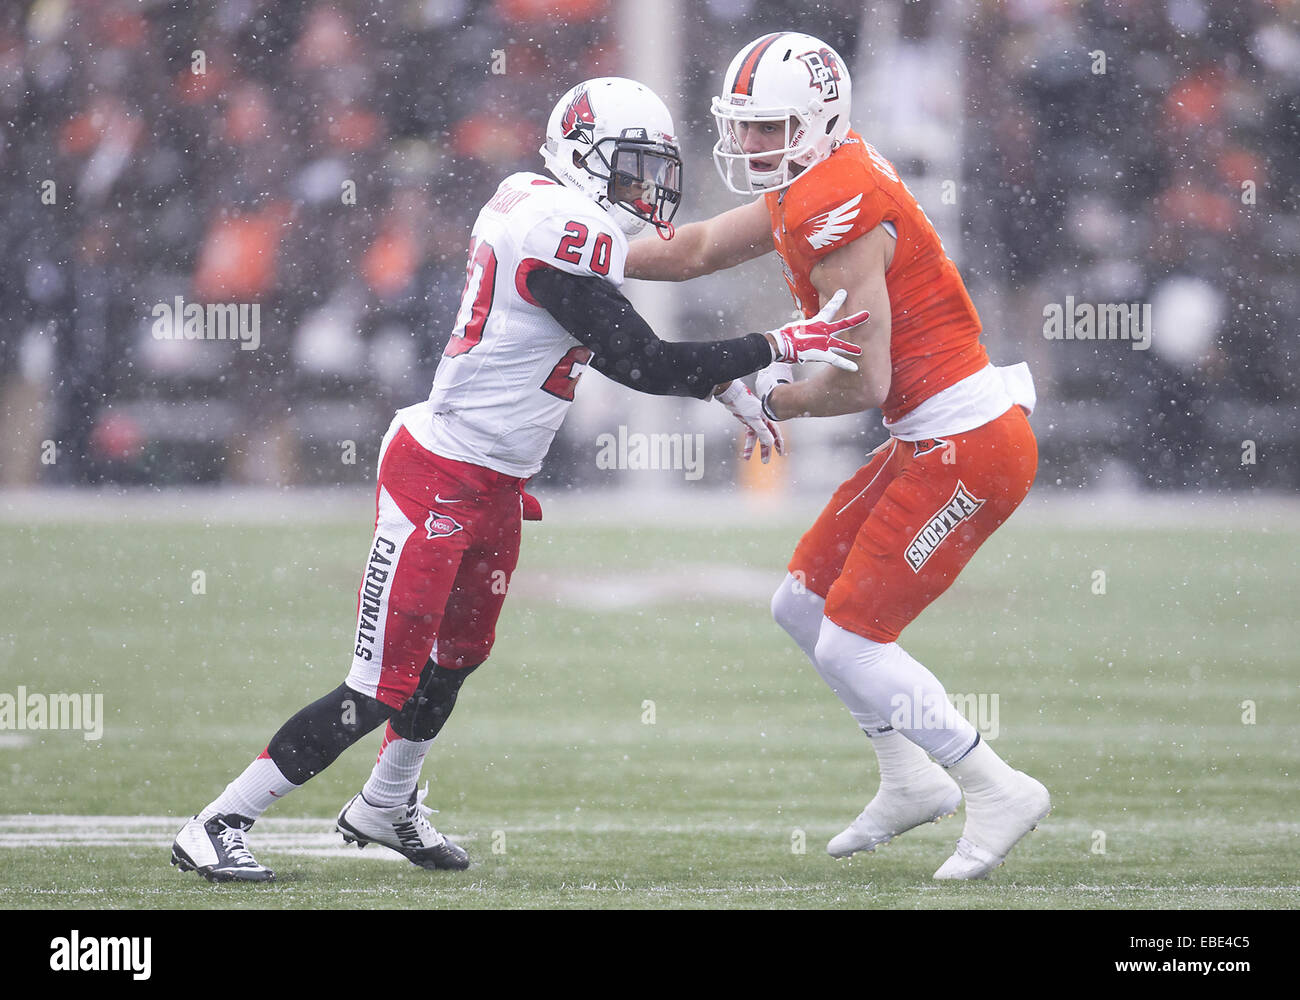 Bowling Green, Ohio, USA. 28th Nov, 2014. Bowling Green wide receiver Gehrig Dieter (4) and Ball State cornerback Darius Conaway (20) during NCAA Football game action between the Bowling Green Falcons and the Ball State Cardinals at Doyt L. Perry Stadium in Bowling Green, Ohio. Ball State defeated Bowling Green 41-24. © csm/Alamy Live News Stock Photo